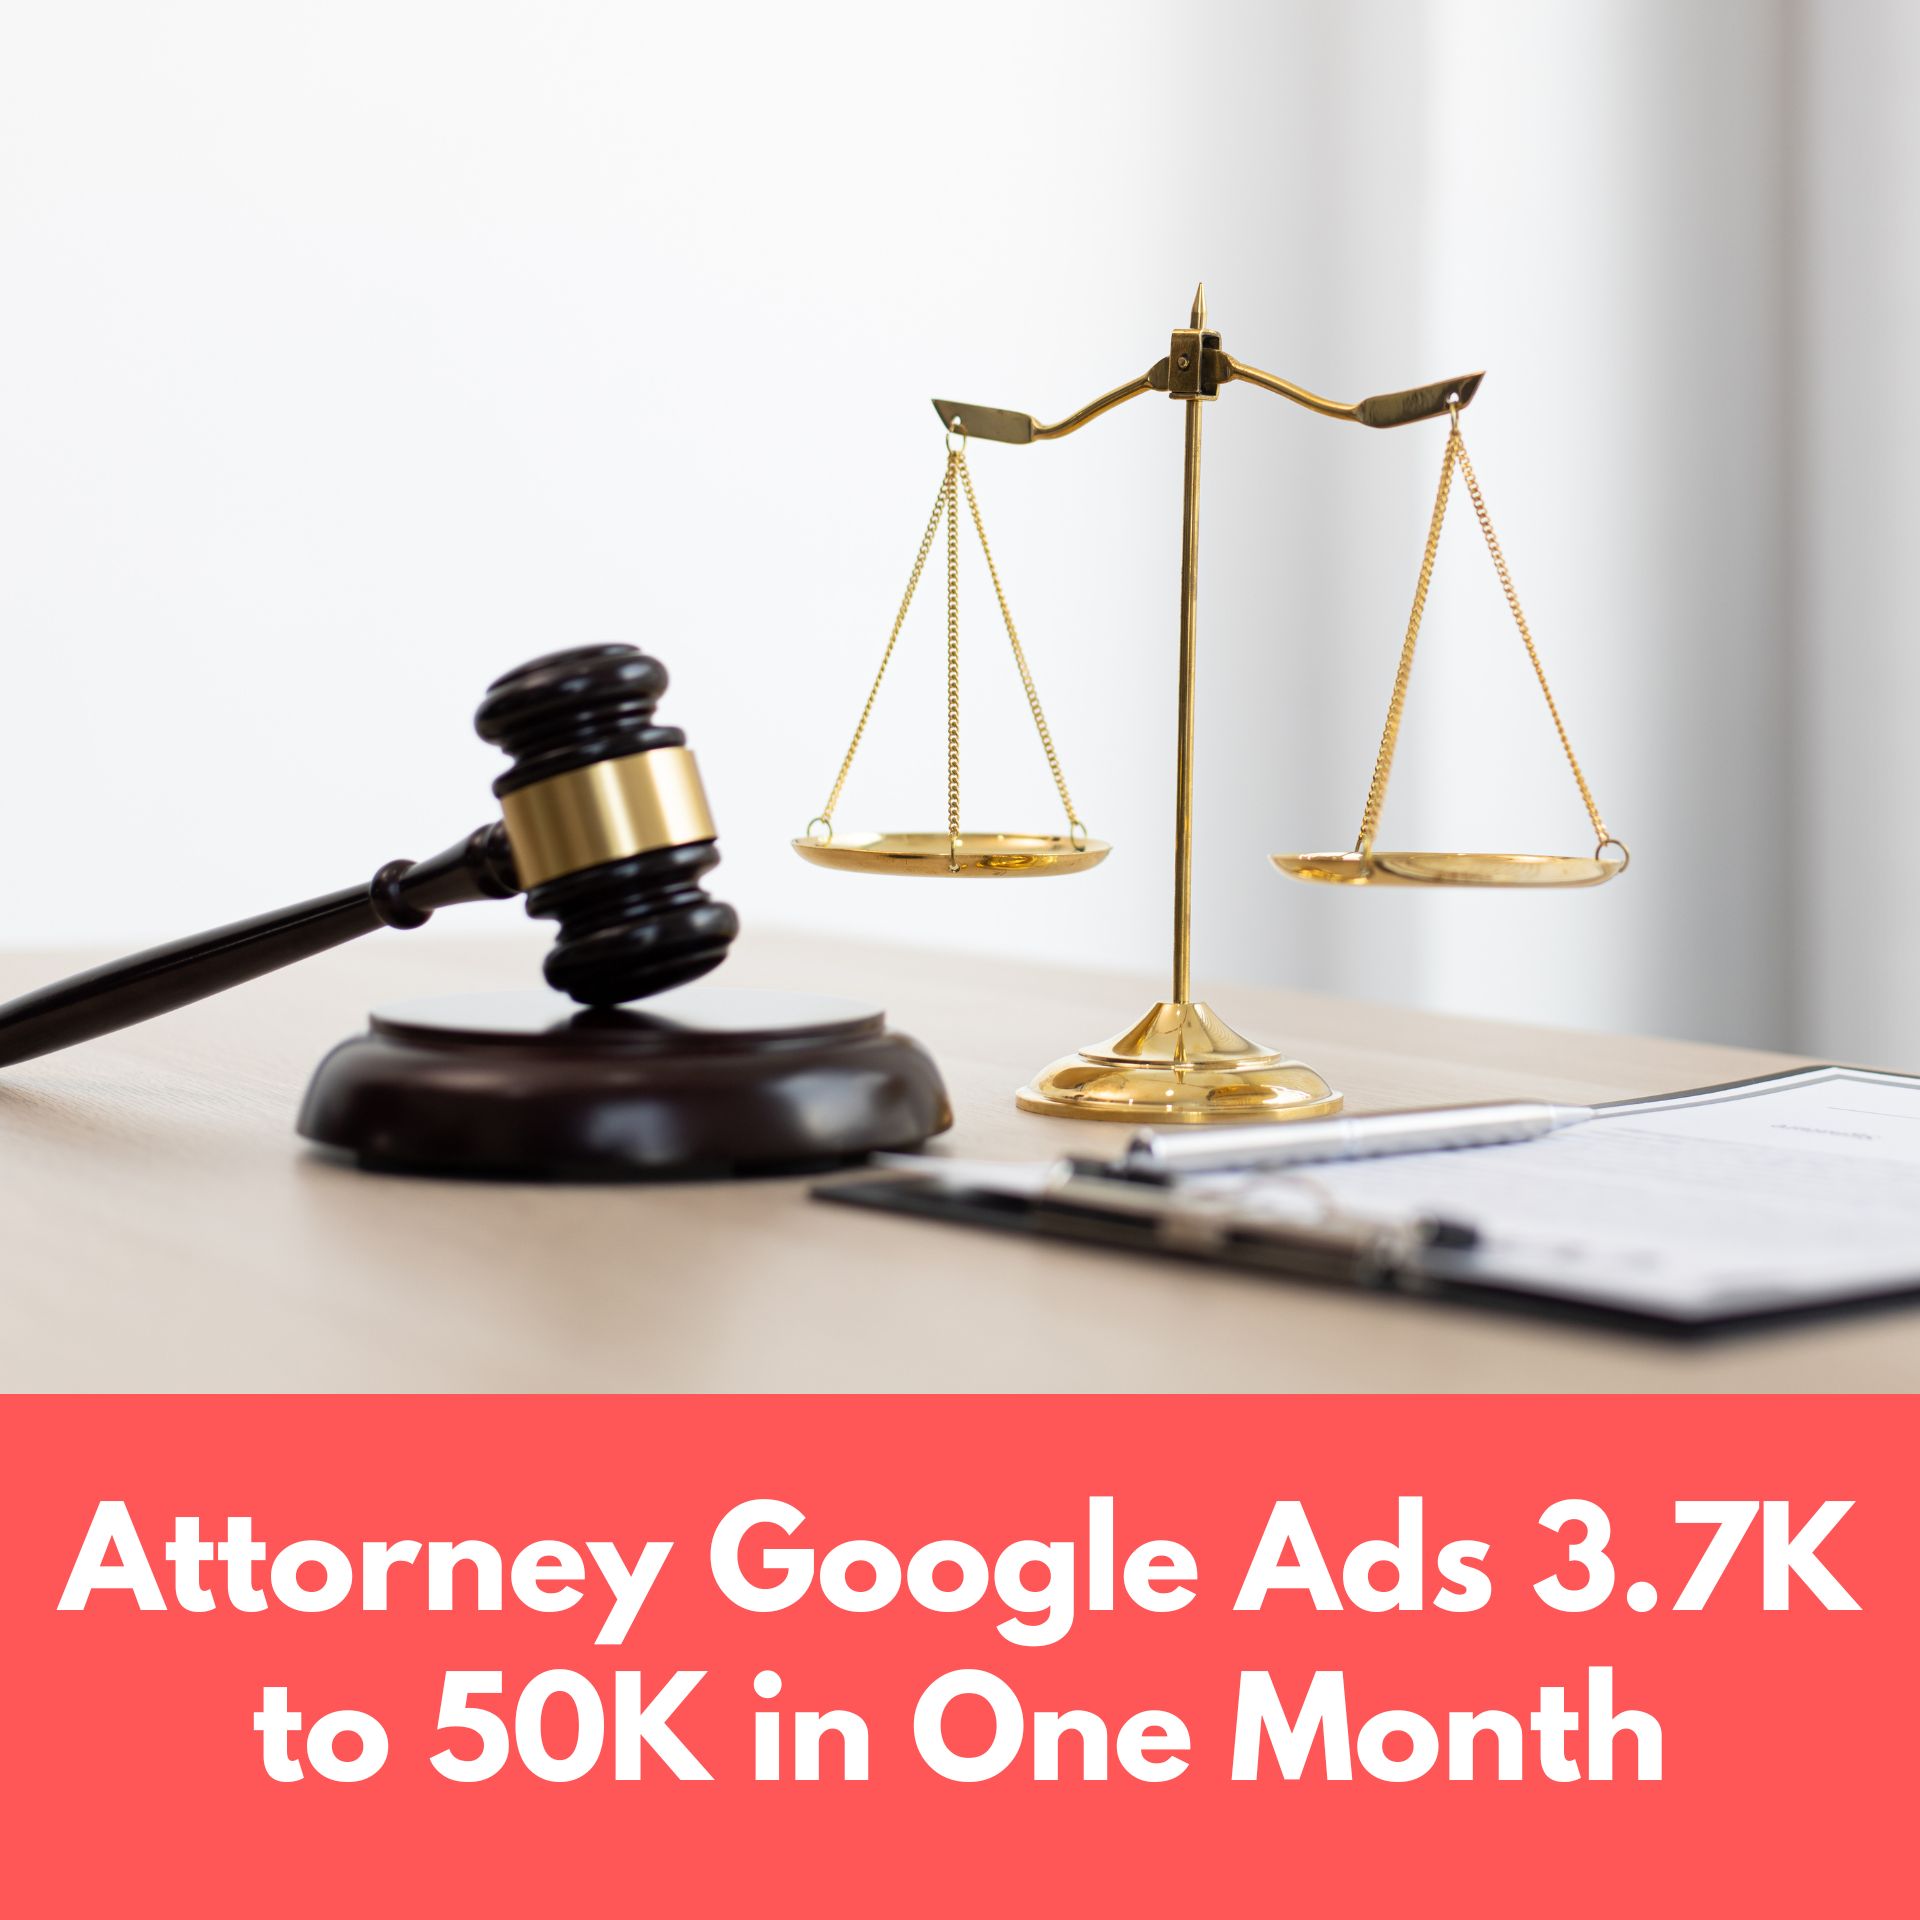 Attorney Google Ads 3.7K to 50K in One Month